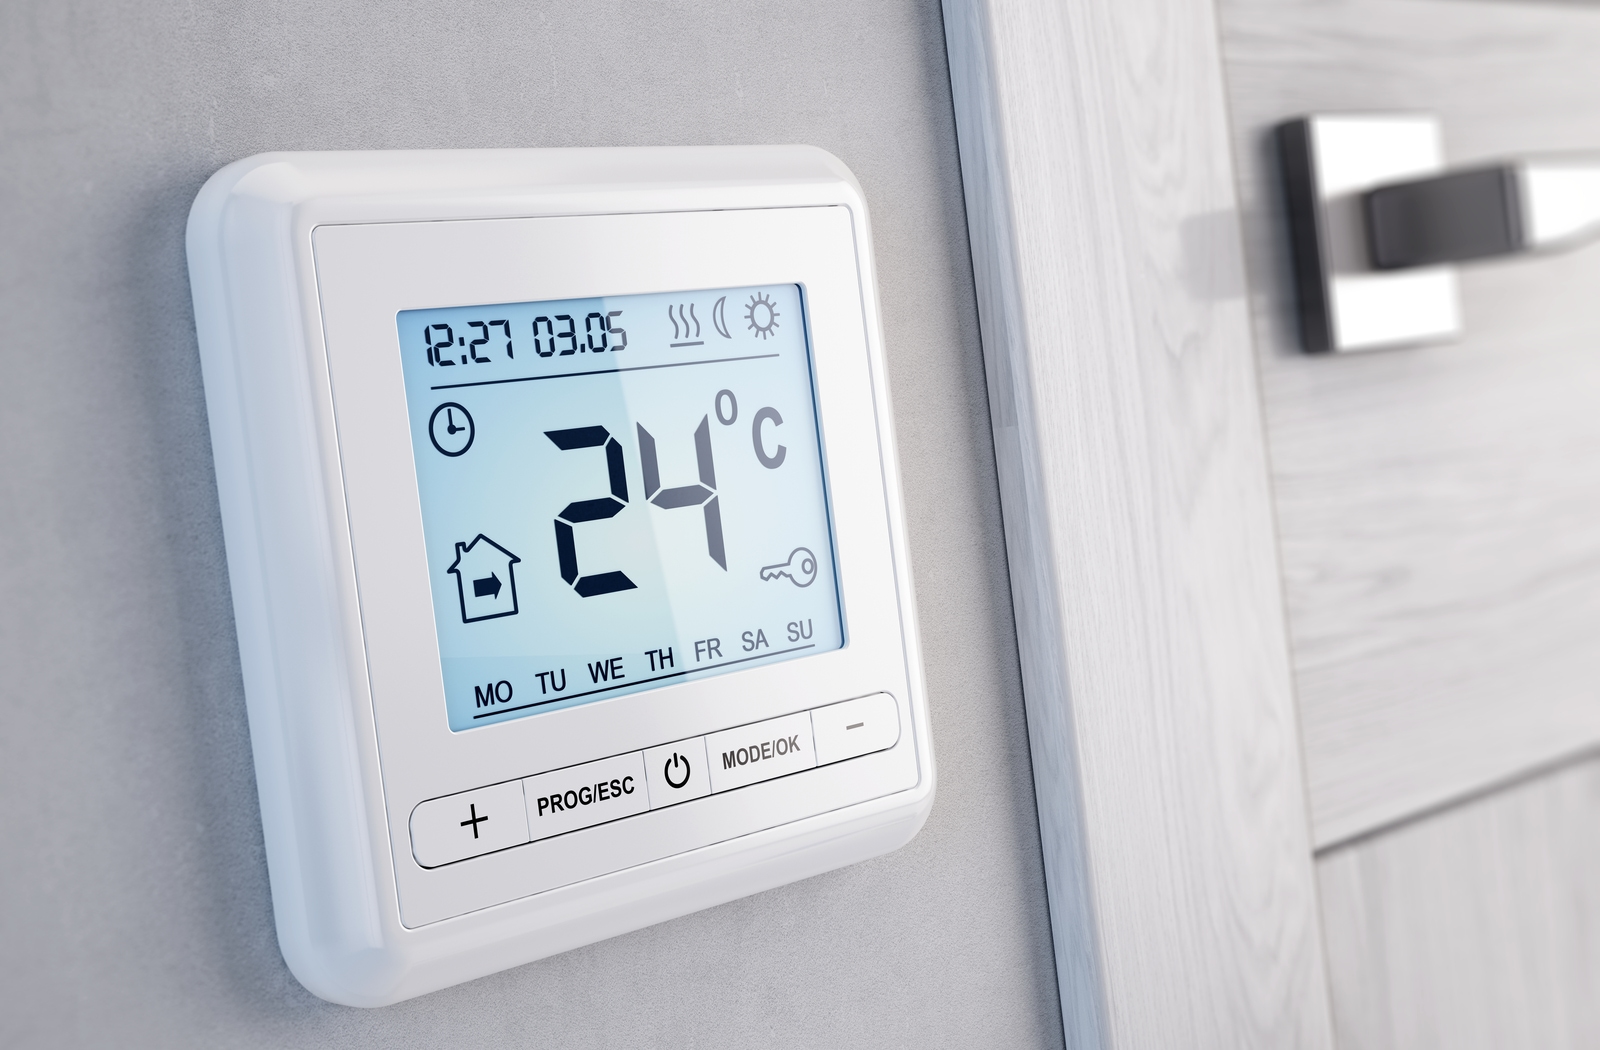 Modern digital programmable Thermostat in home set to 24°C during day time